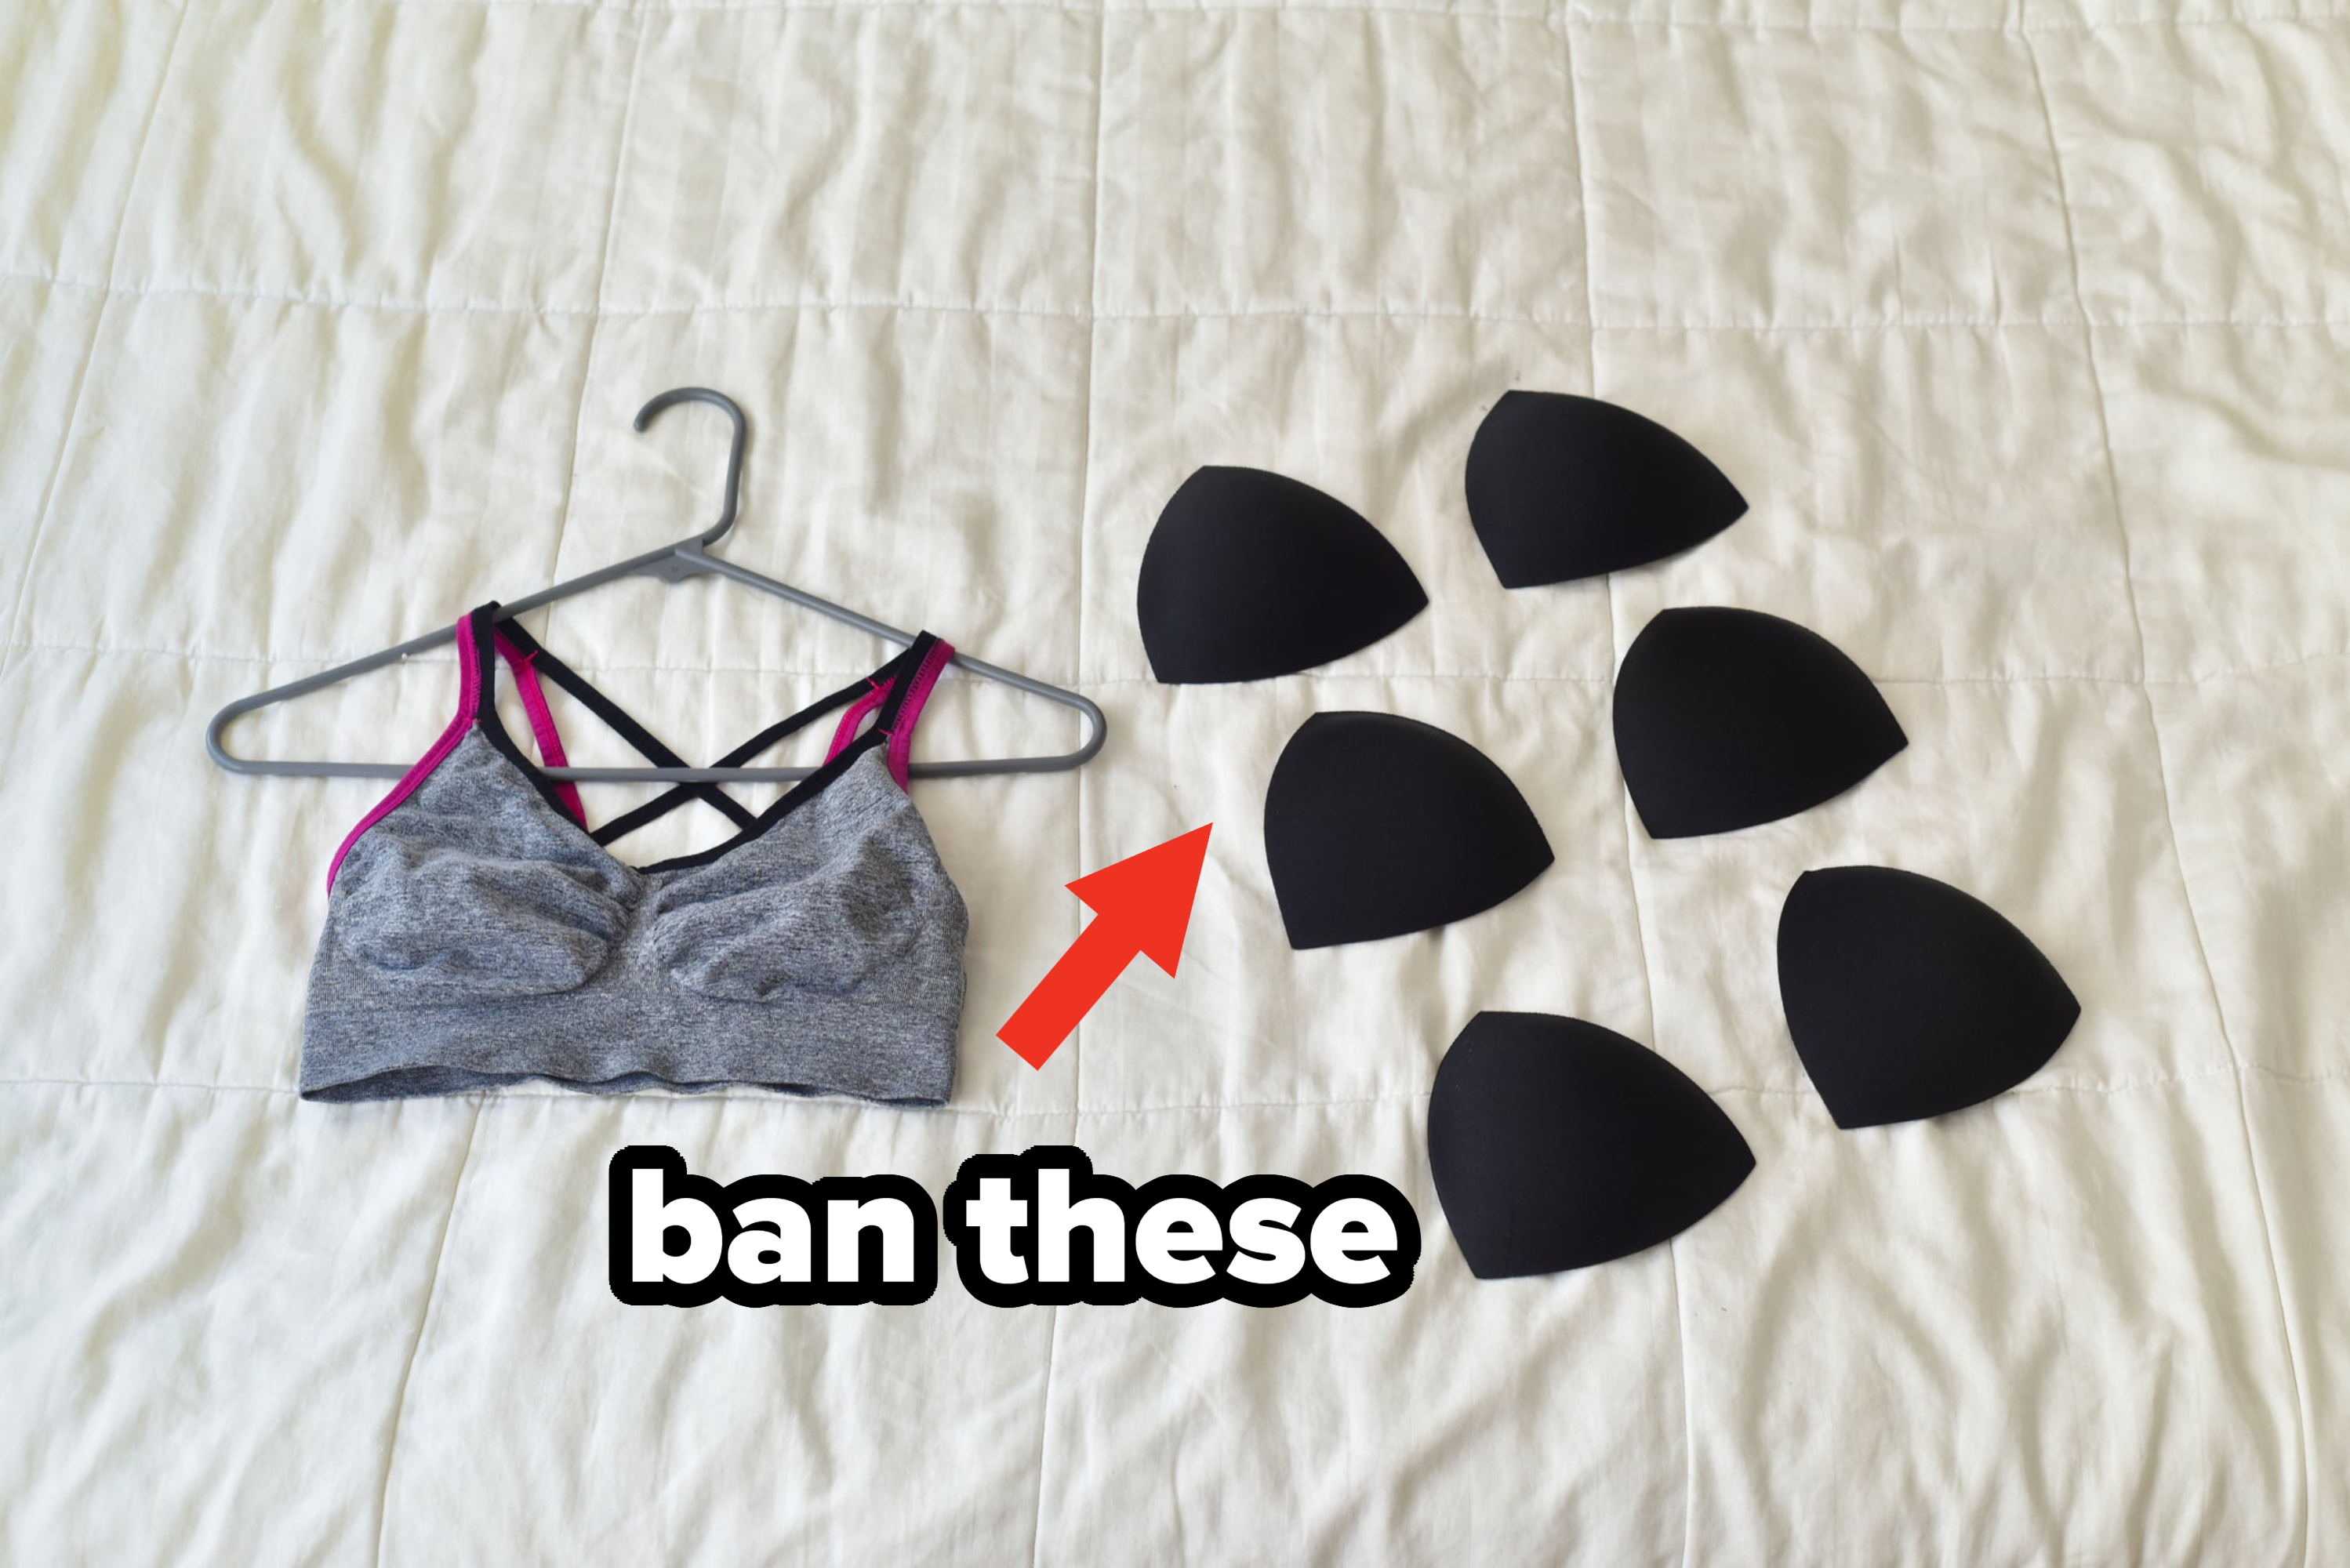 Sports bra on a hanger next to various bra cup inserts on a quilted background